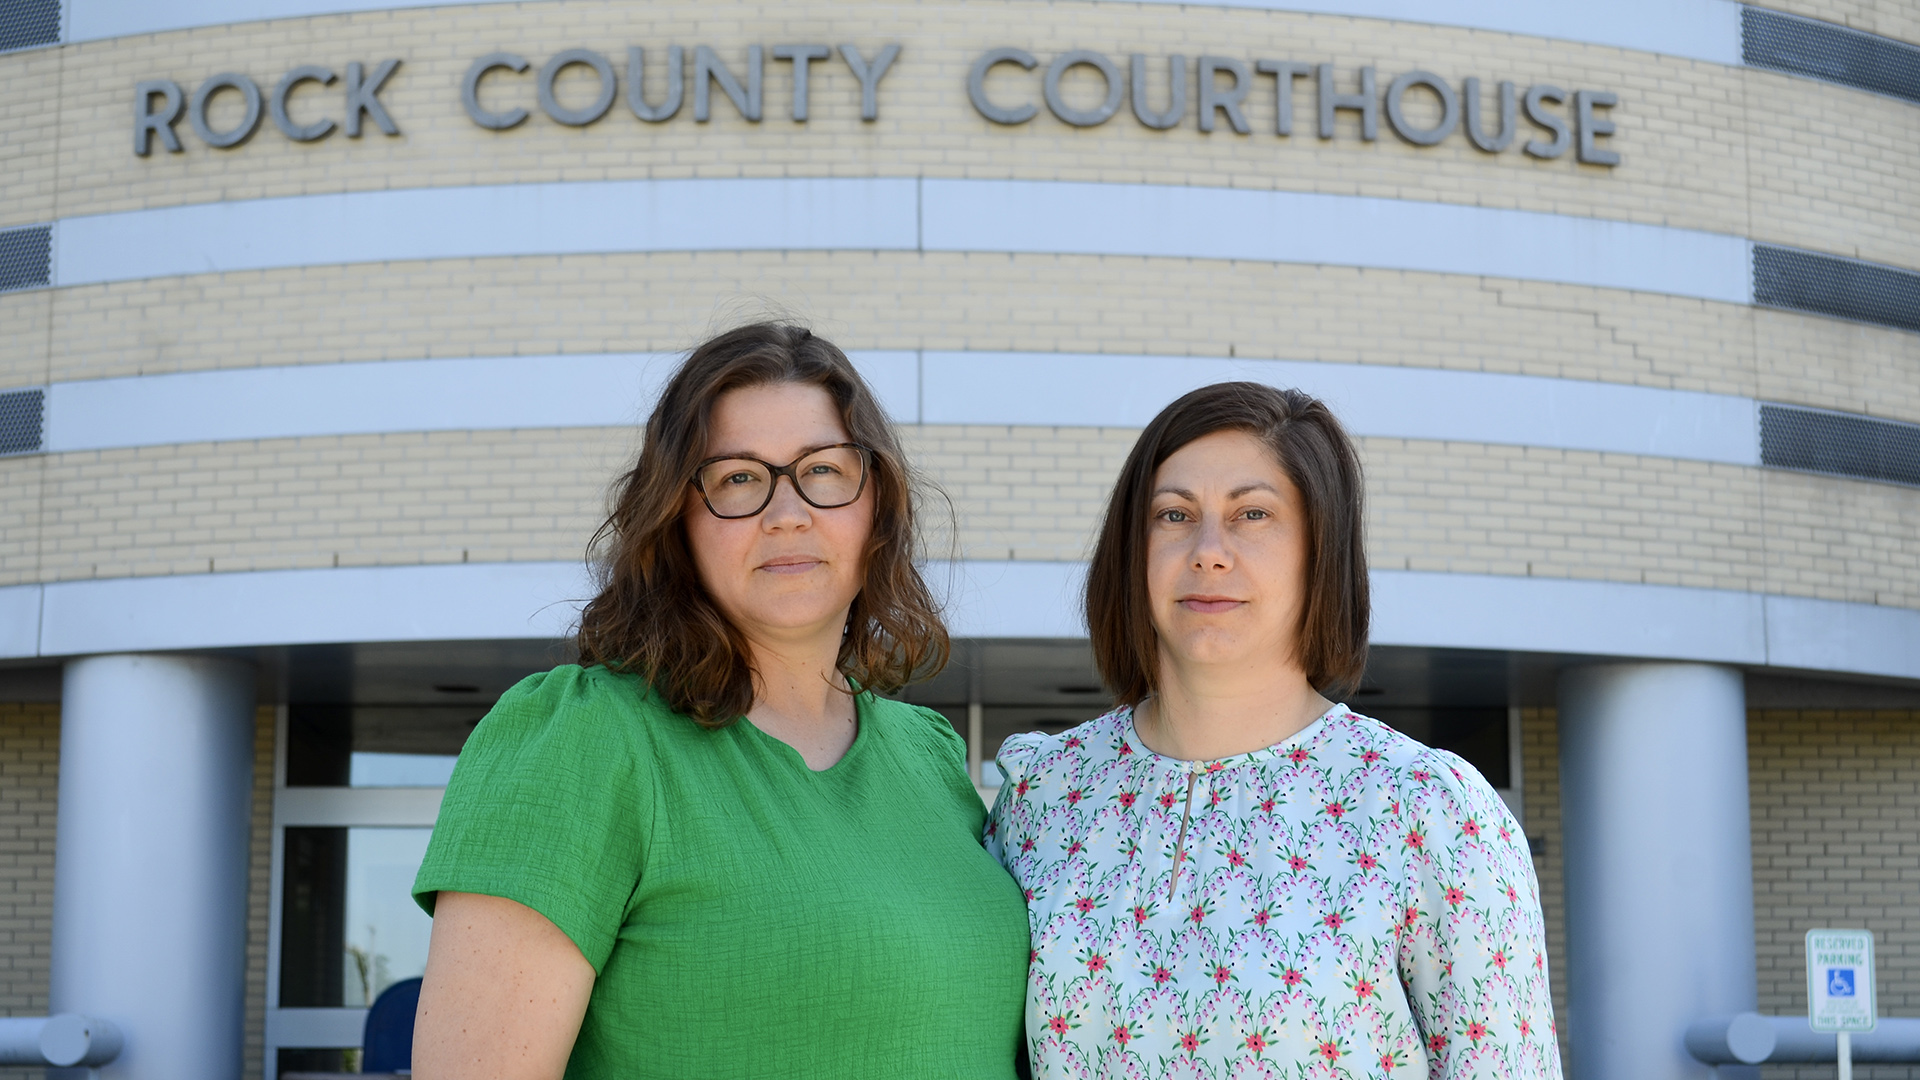 Jamie Gaffke and Ruth Vater stand and pose for a portrait in front of a brick building with metal pillars and a letter sign reading "Rock County Courthouse."